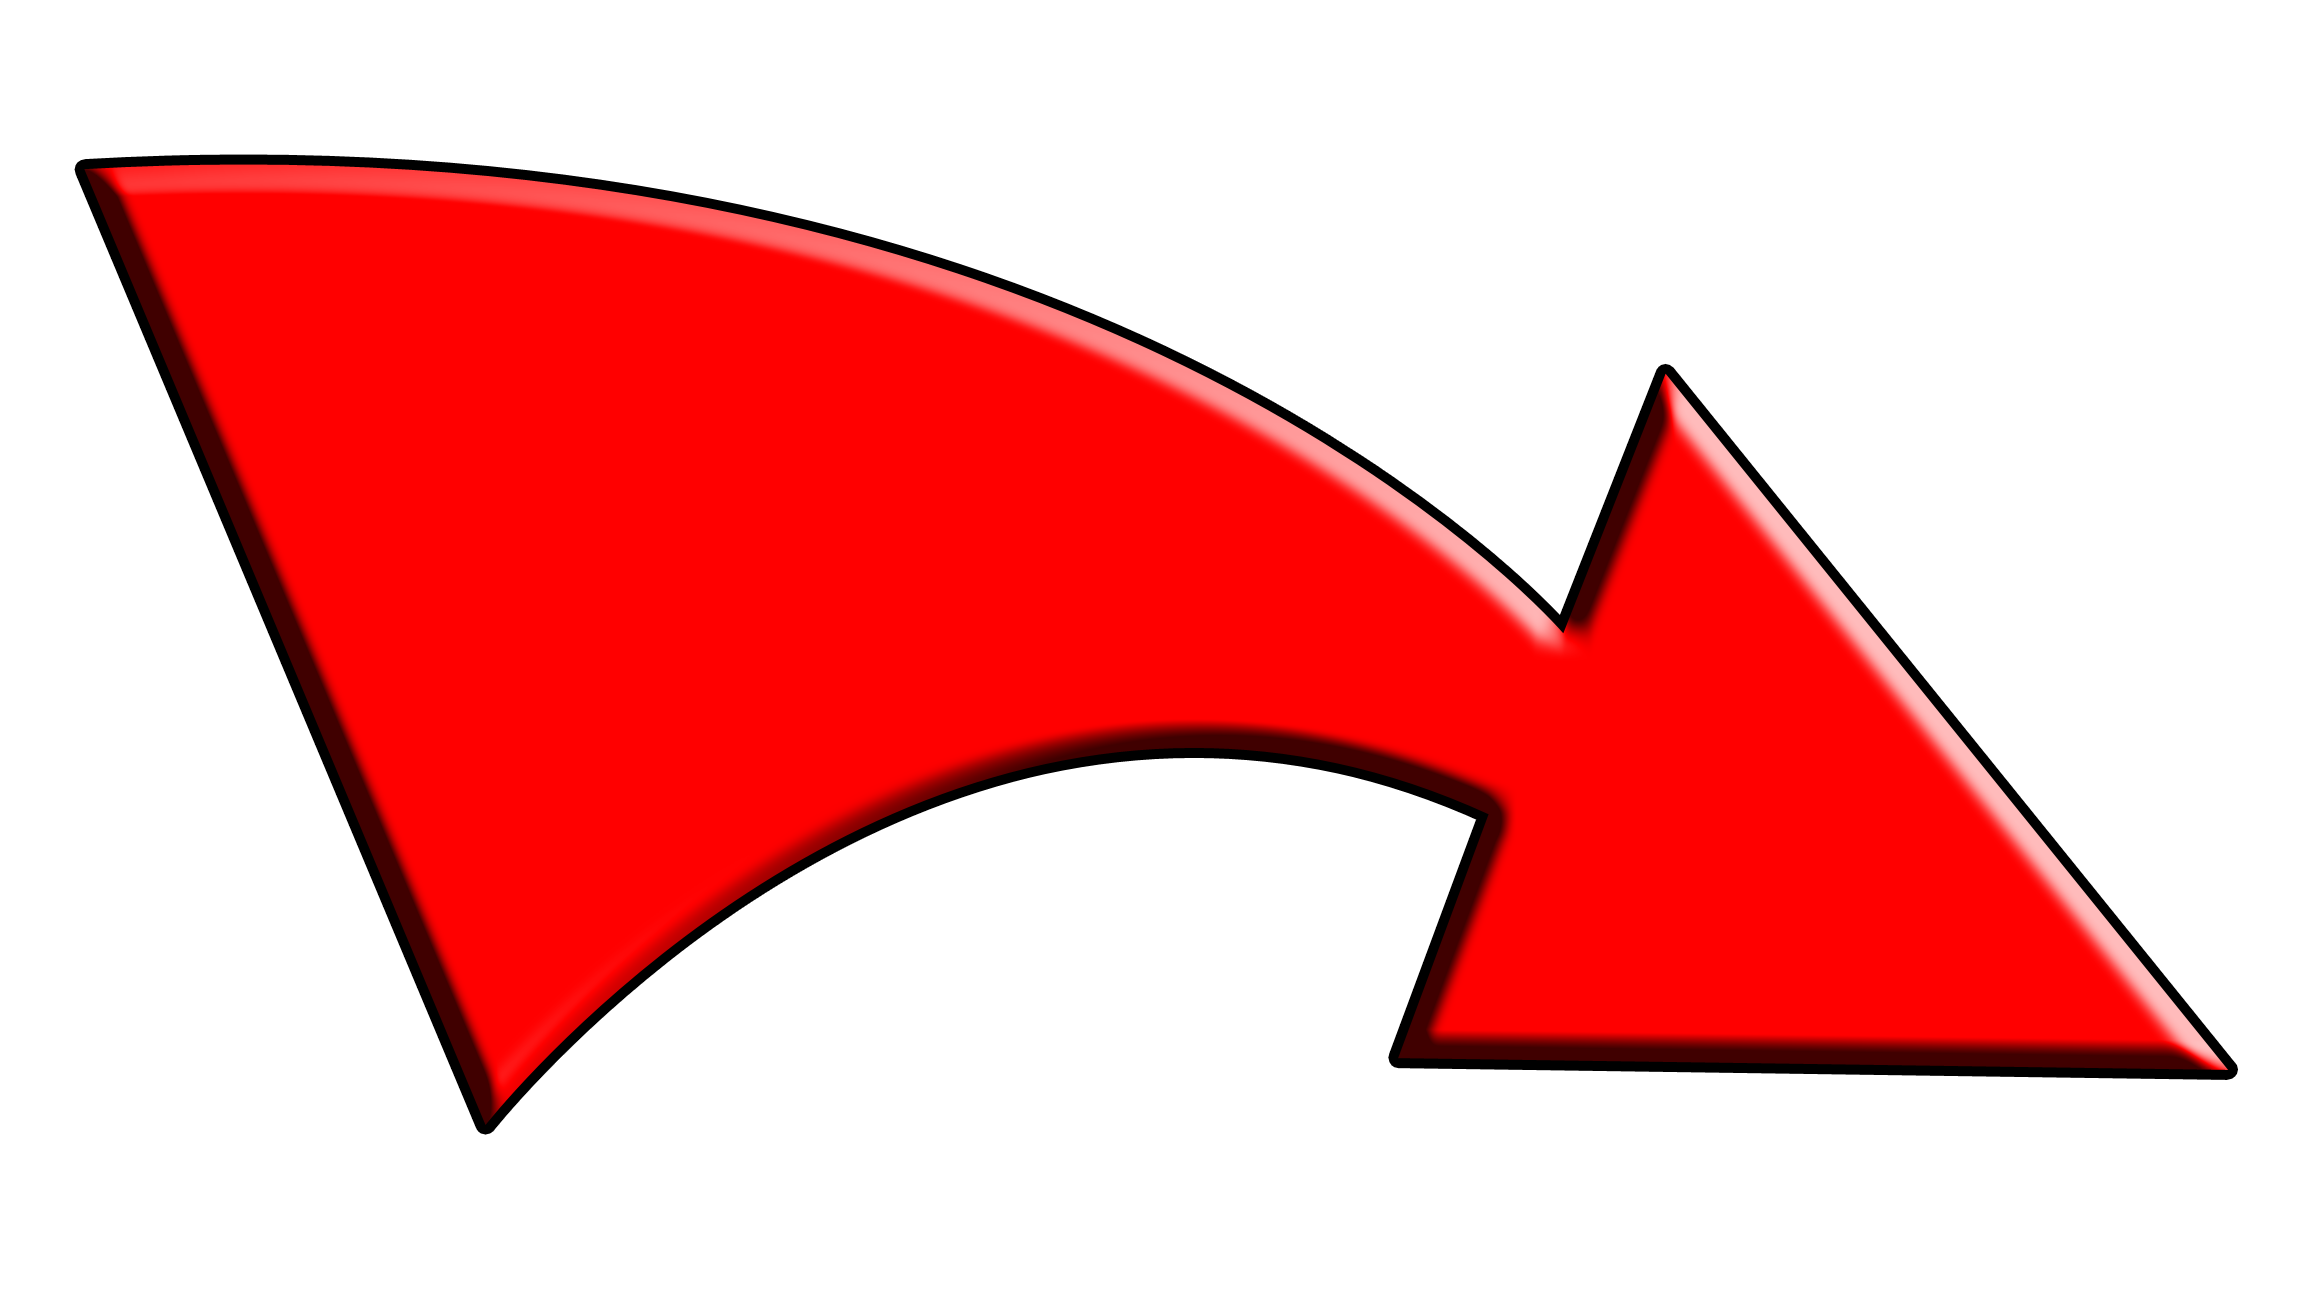 Free Red Arrow Image, Download Free Clip Art, Free Clip